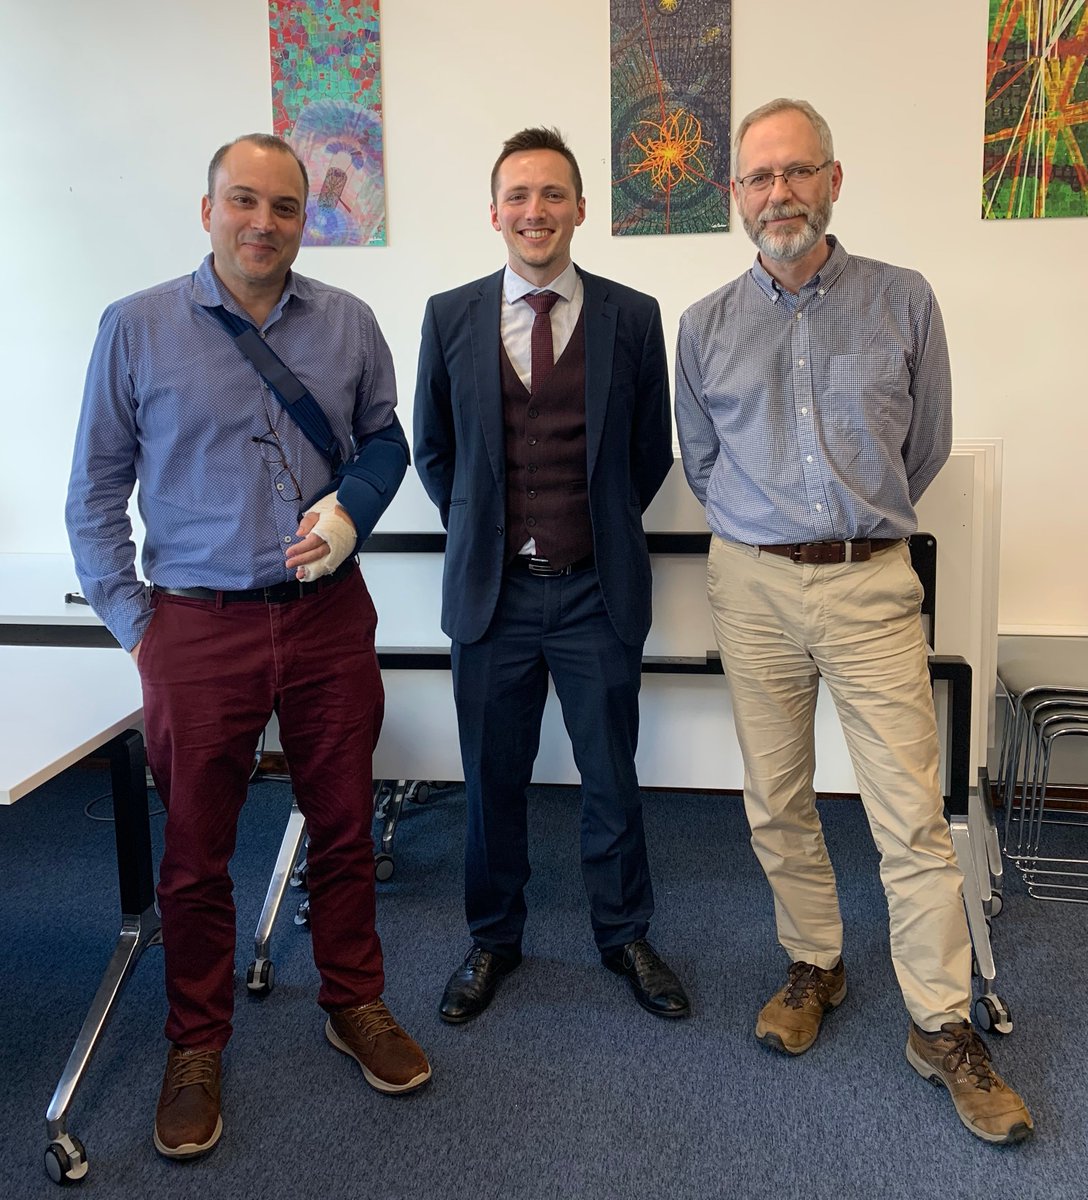 Congratulations to Dr Tim Marley on successfully defending his #PhD on the MIGDAL experiment! 🥳 His PhD was jointly supervised by Prof. Pawel Majewski from PPD and Prof. Henrique Araujo from @ImperialPhysics. You can read more about MIGDAL here 👇 ppd.stfc.ac.uk/Pages/MIGDAL-E…